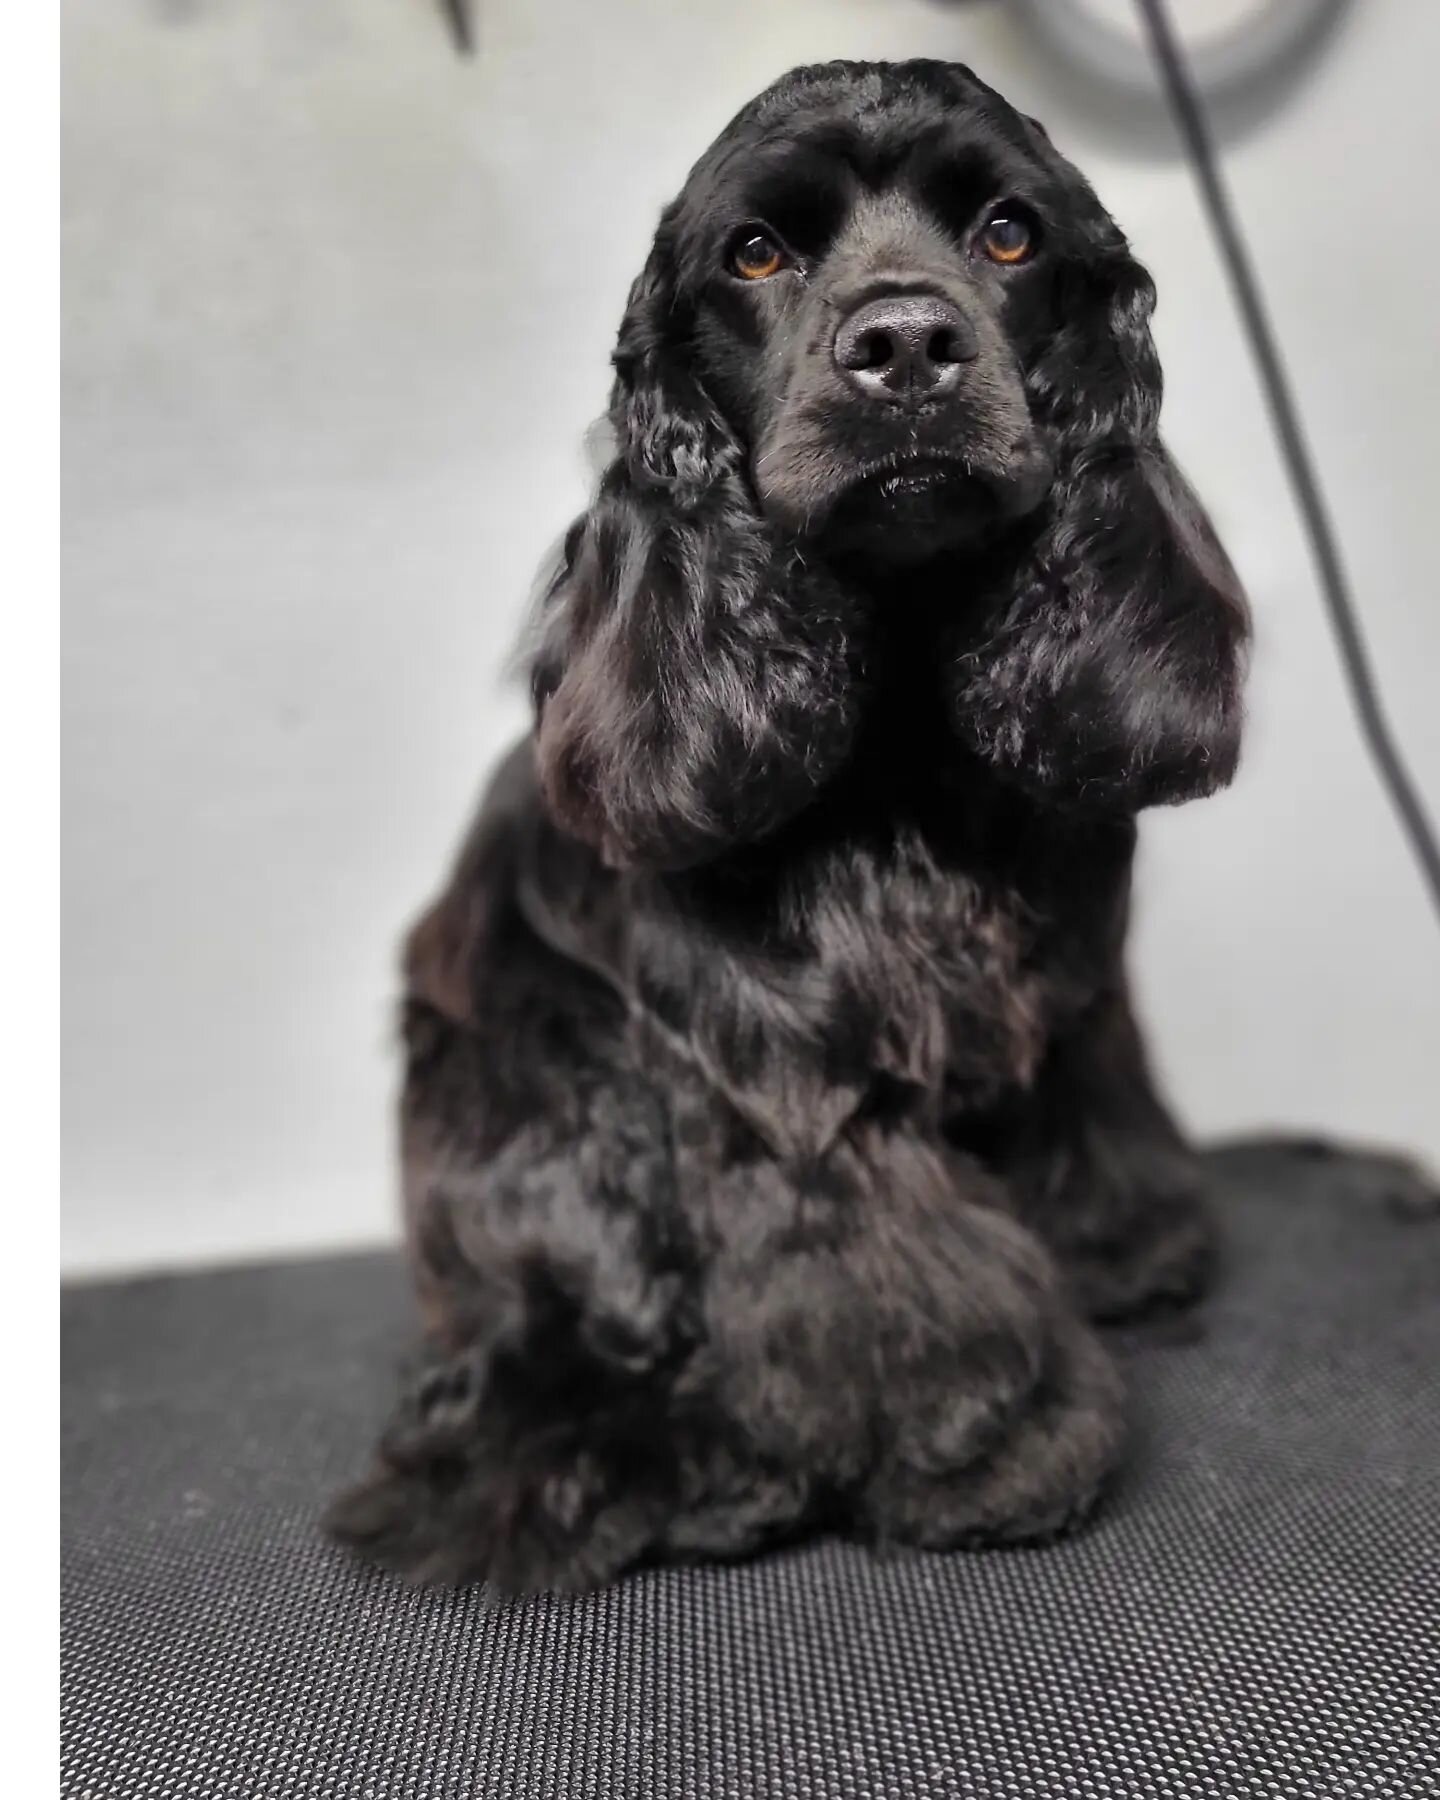 We have been a bit behind on posting lately.  But Look at this sweet angel heart 😍
.
.
#dogsofinstagram #doggrooming #doggroomer #mobilegroomer #oregondogs #cockerspaniel